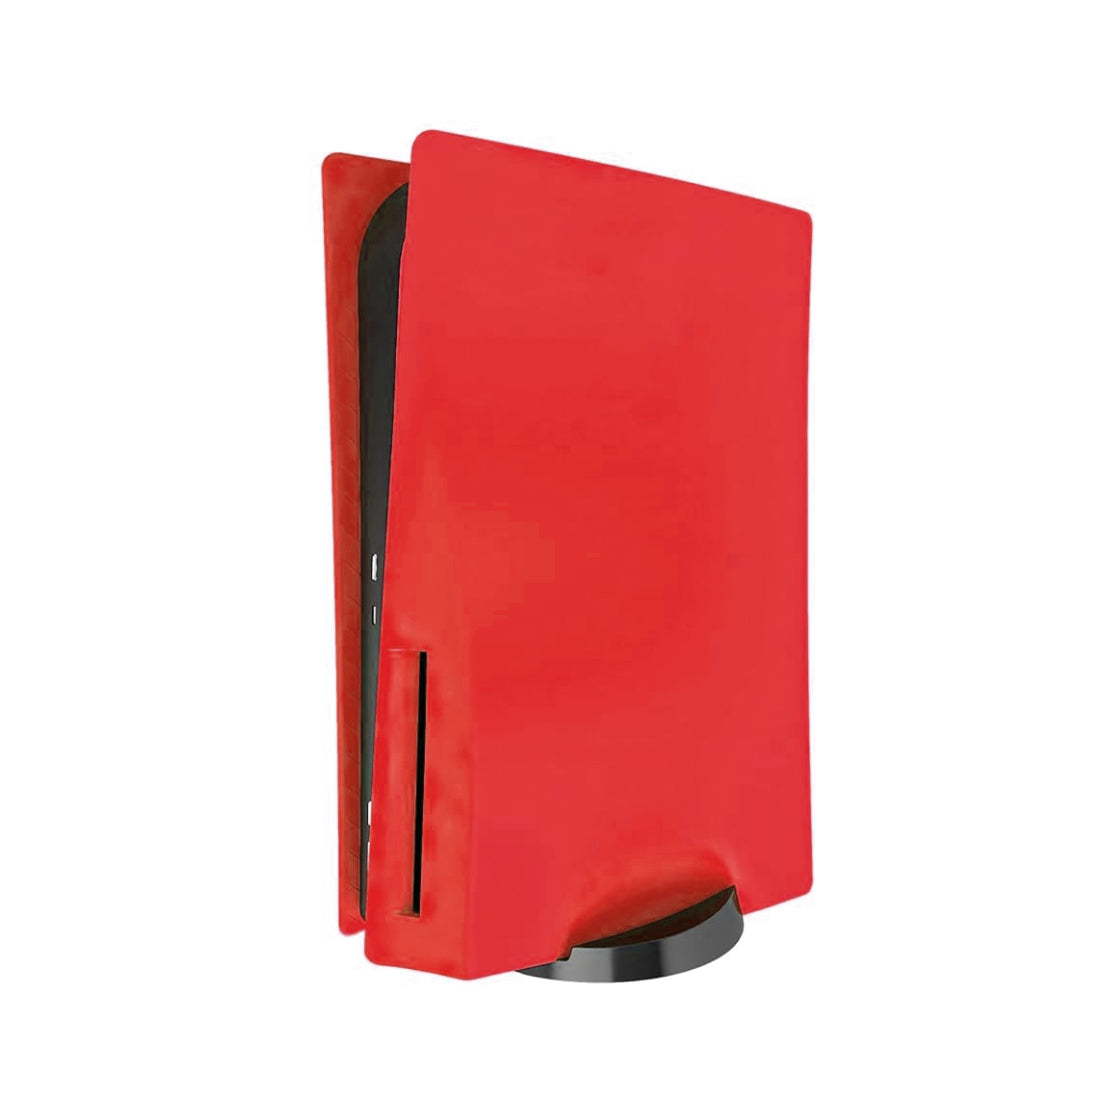 Faceplate Standard Plastic Cover For Playstation 5 - Disc Edition - Red - أكسسوار